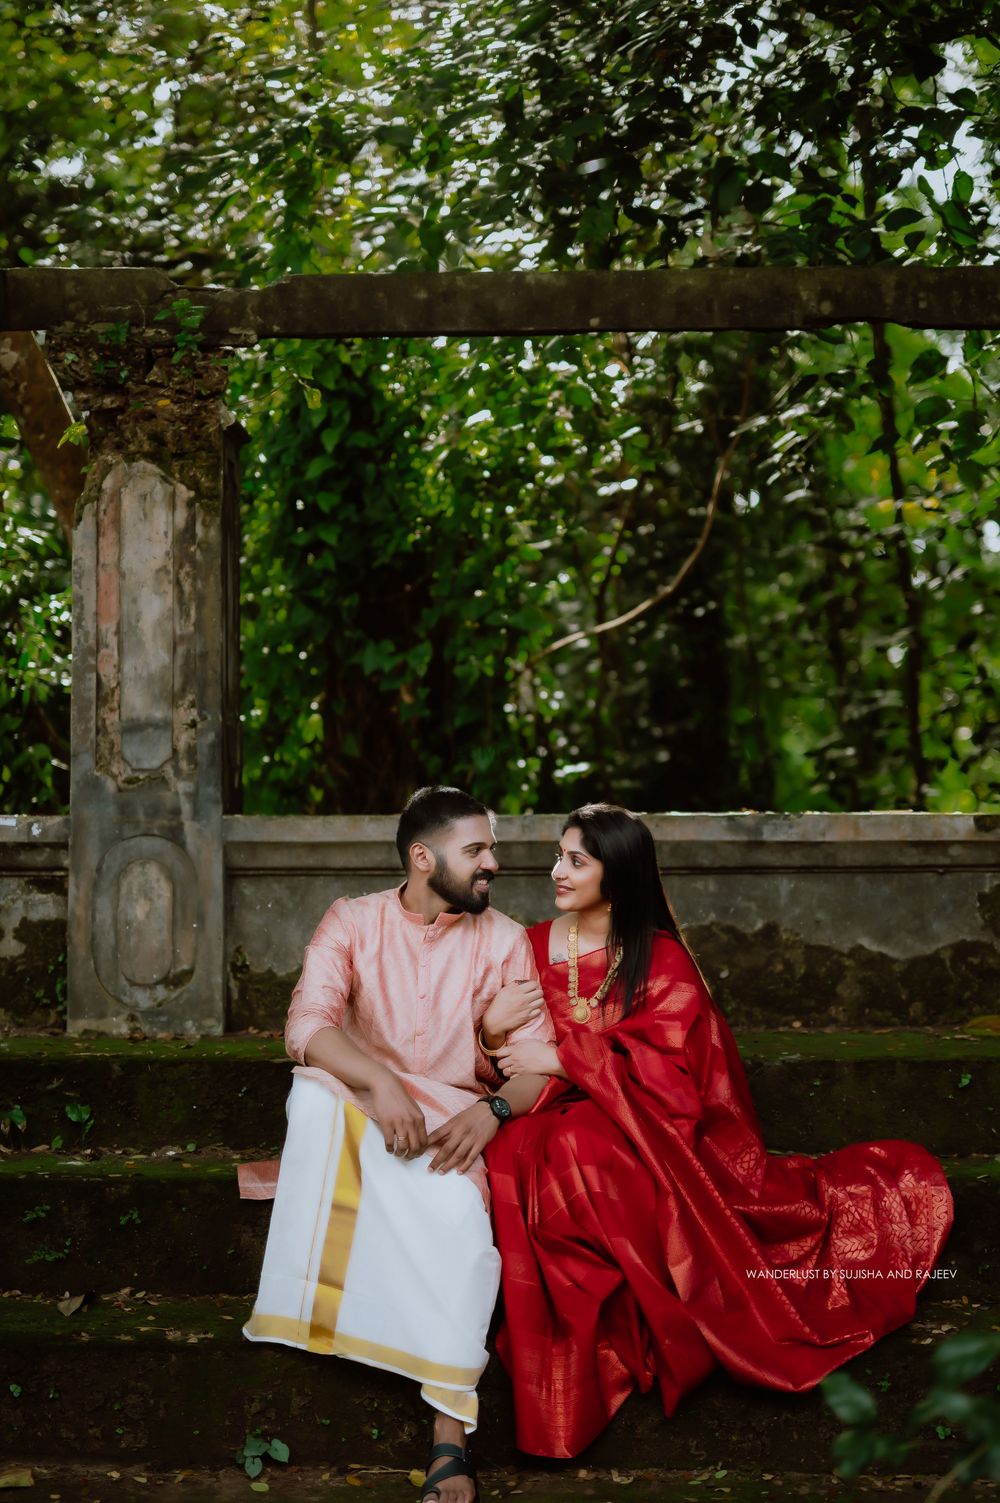 Photo From Engagement Ceremony - By Wanderlust by Sujisha and Rajeev